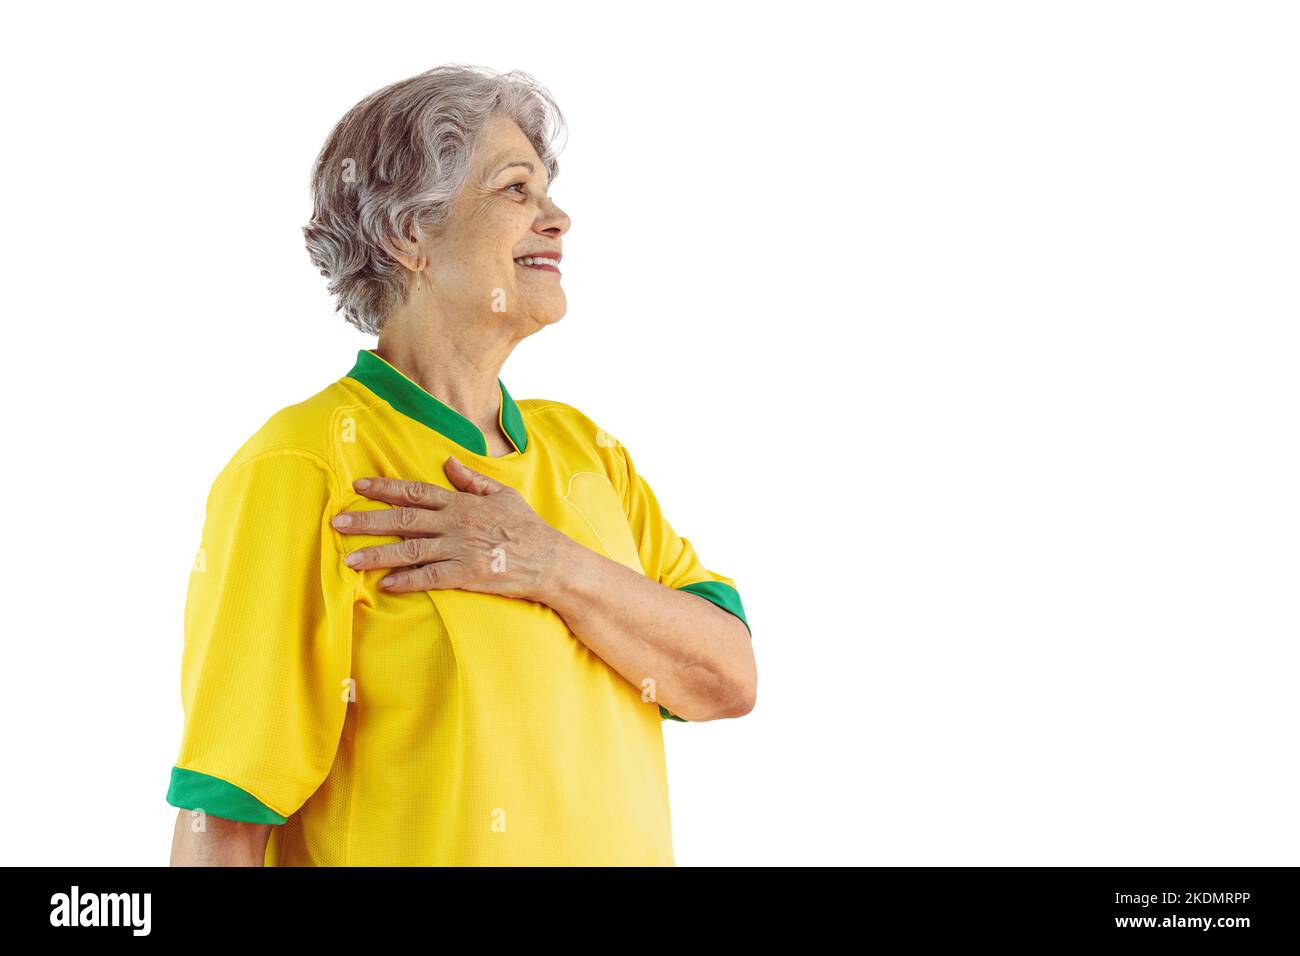 Mature Woman with Soccer Team Yellow Shirt Isolated on White. Sport Fan With Flag Celebrating the Cup. Stock Photo